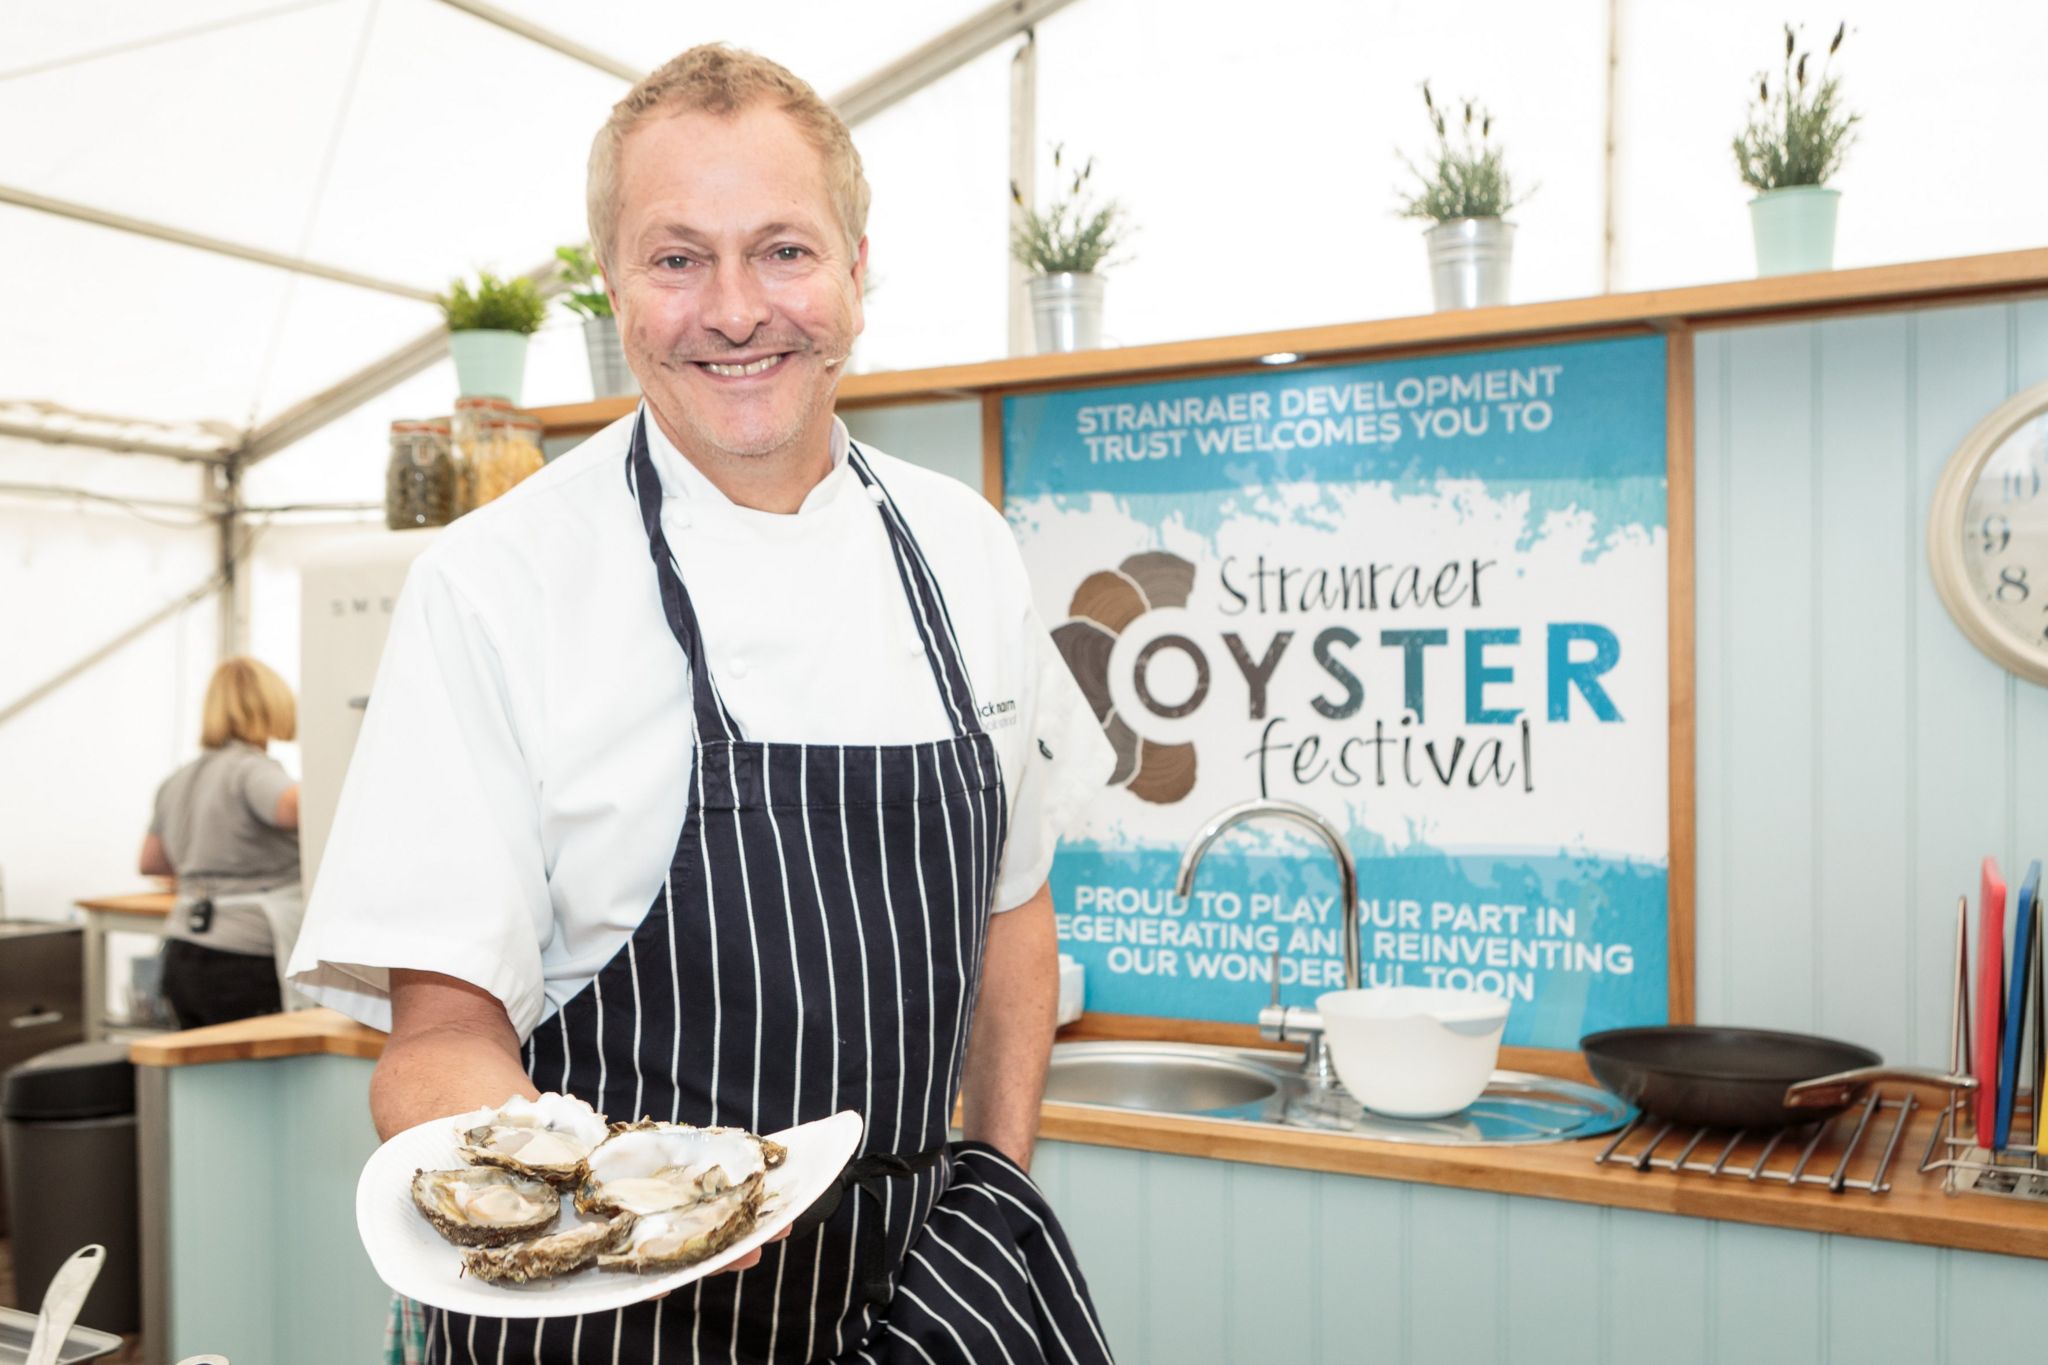 In pictures Stranraer Oyster Festival BBC News